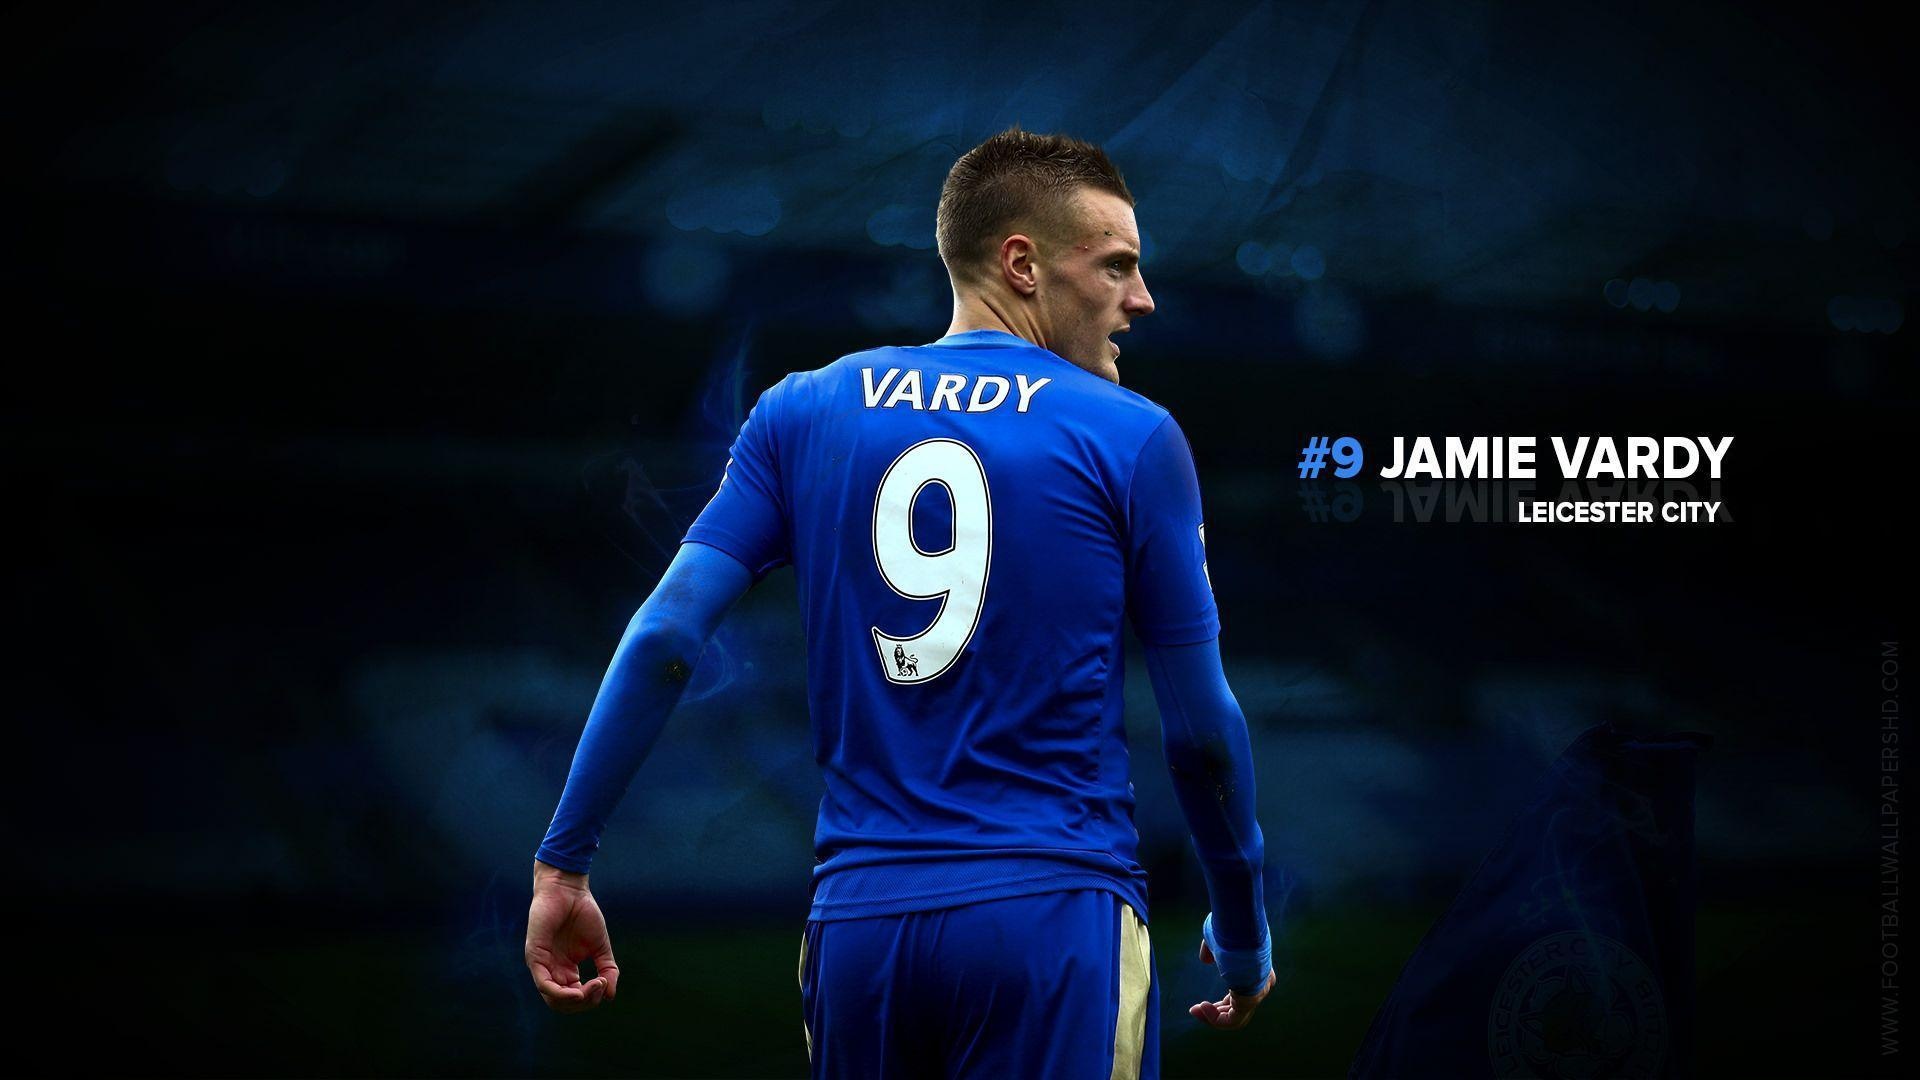 Leicester City, Team wallpapers, Iconic logo design, 1920x1080 Full HD Desktop